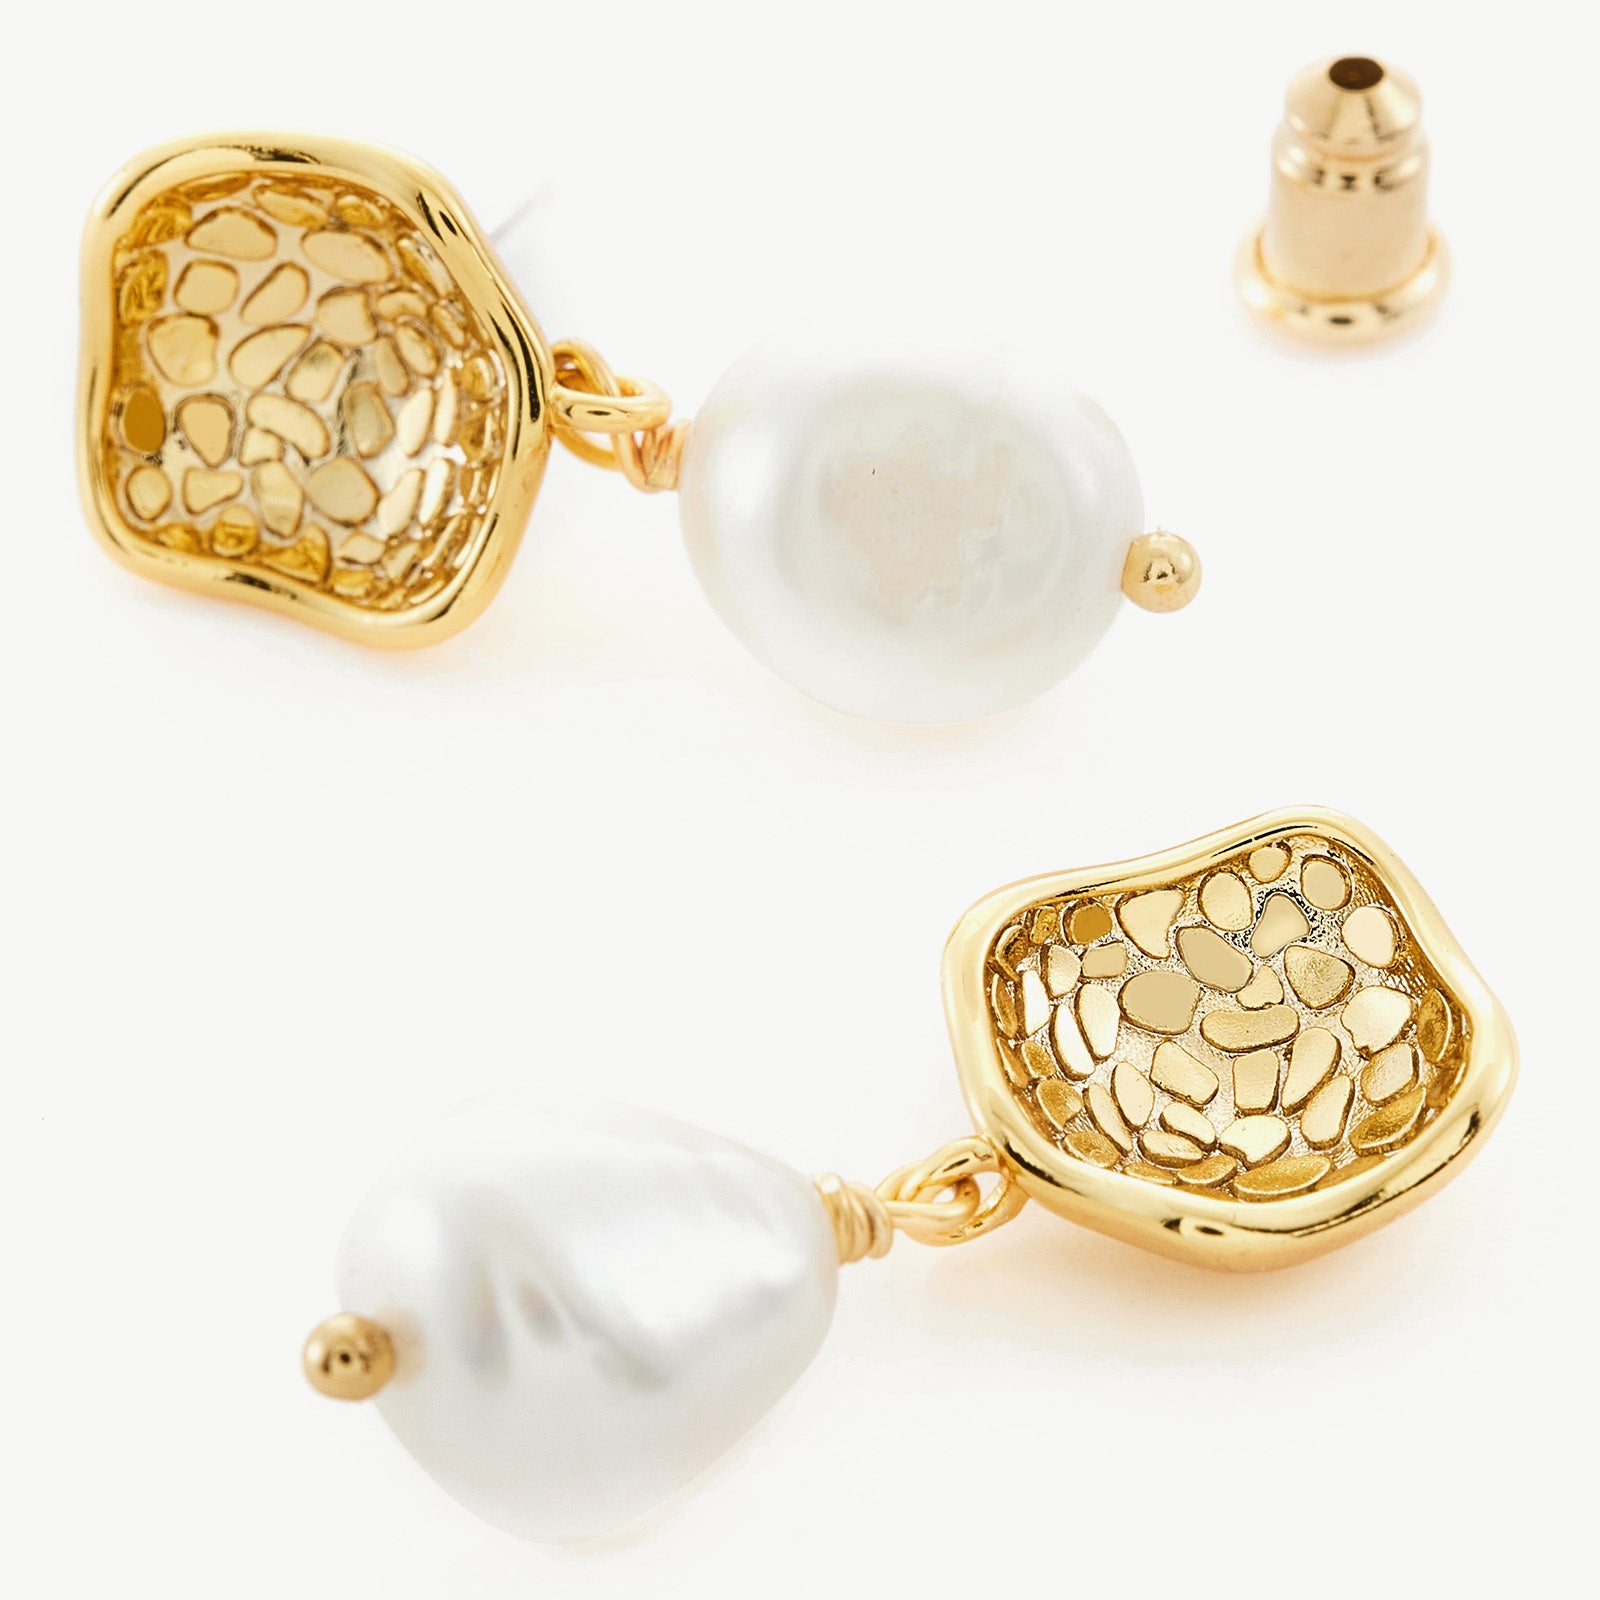 Molten Baroque Pearl Drop Earrings with sculpted details, these earrings provide a splendor of sculptural beauty, capturing attention with the exquisite combination of molten metal and baroque pearls